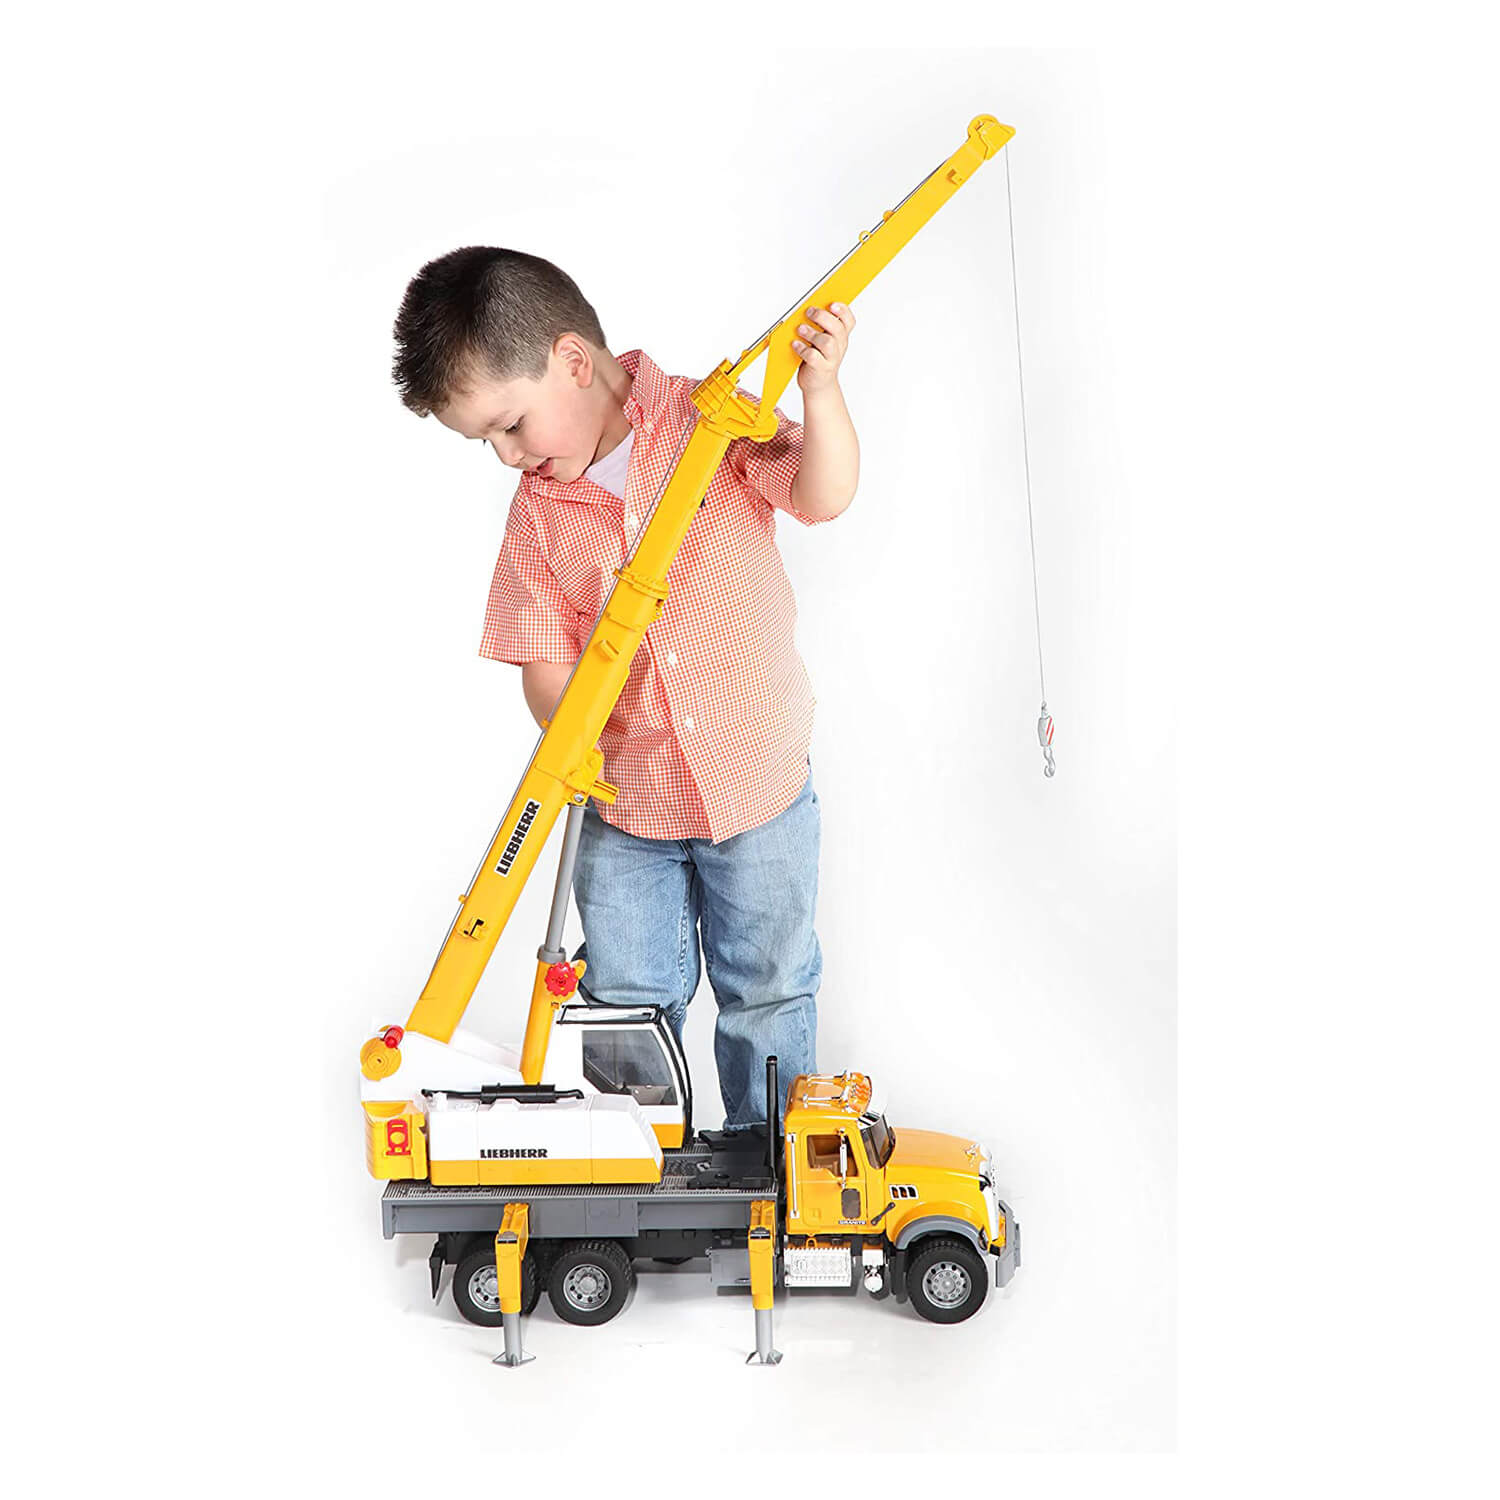 Kid playing with the crane truck.